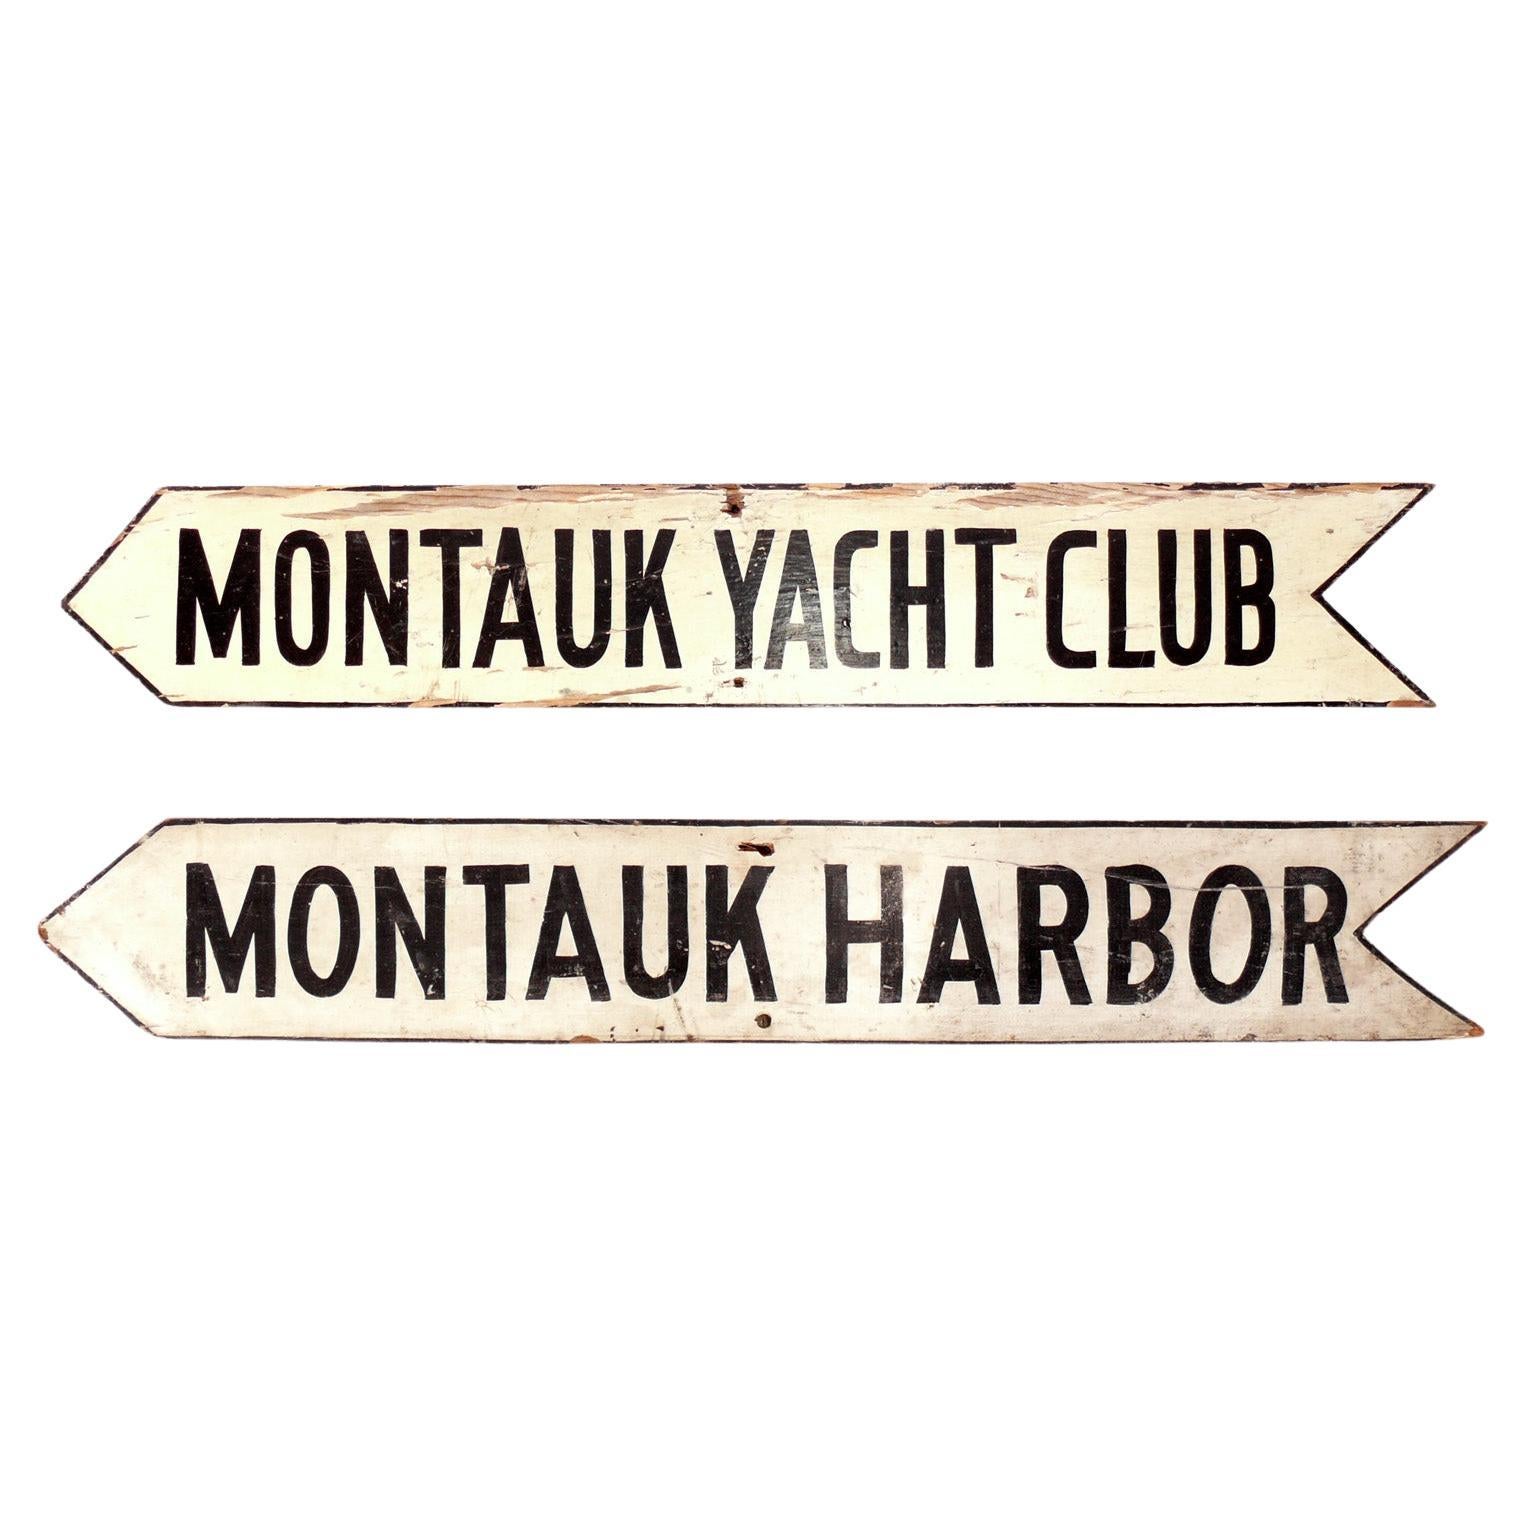 Vintage Montauk Sign circa 1950s Perfect for Your Hamptons House